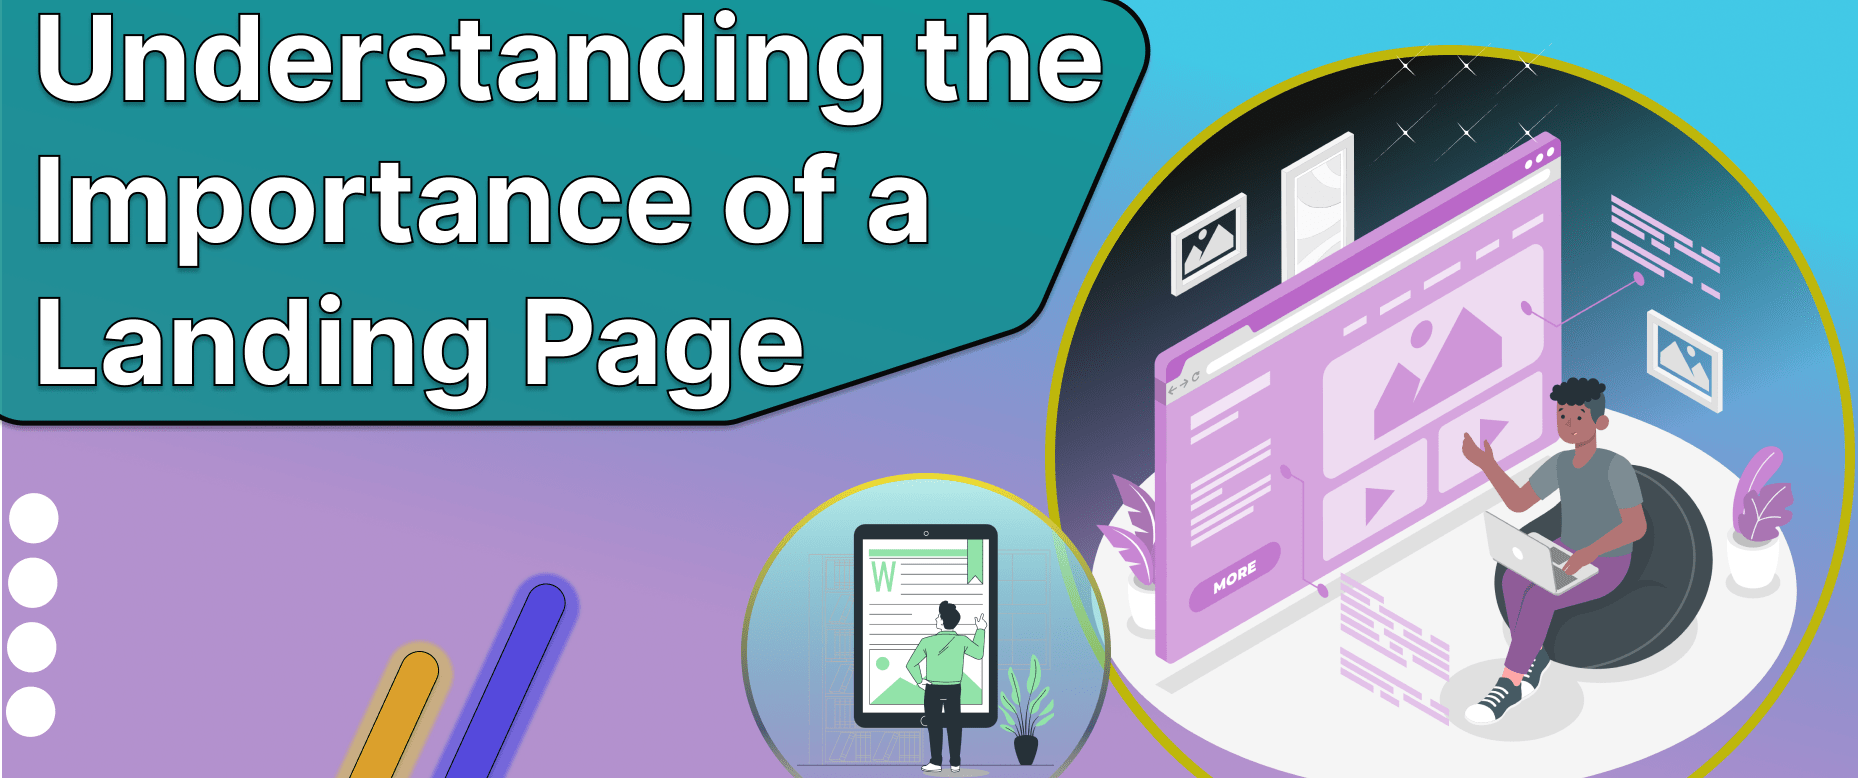 Understanding the importance of a Landing page